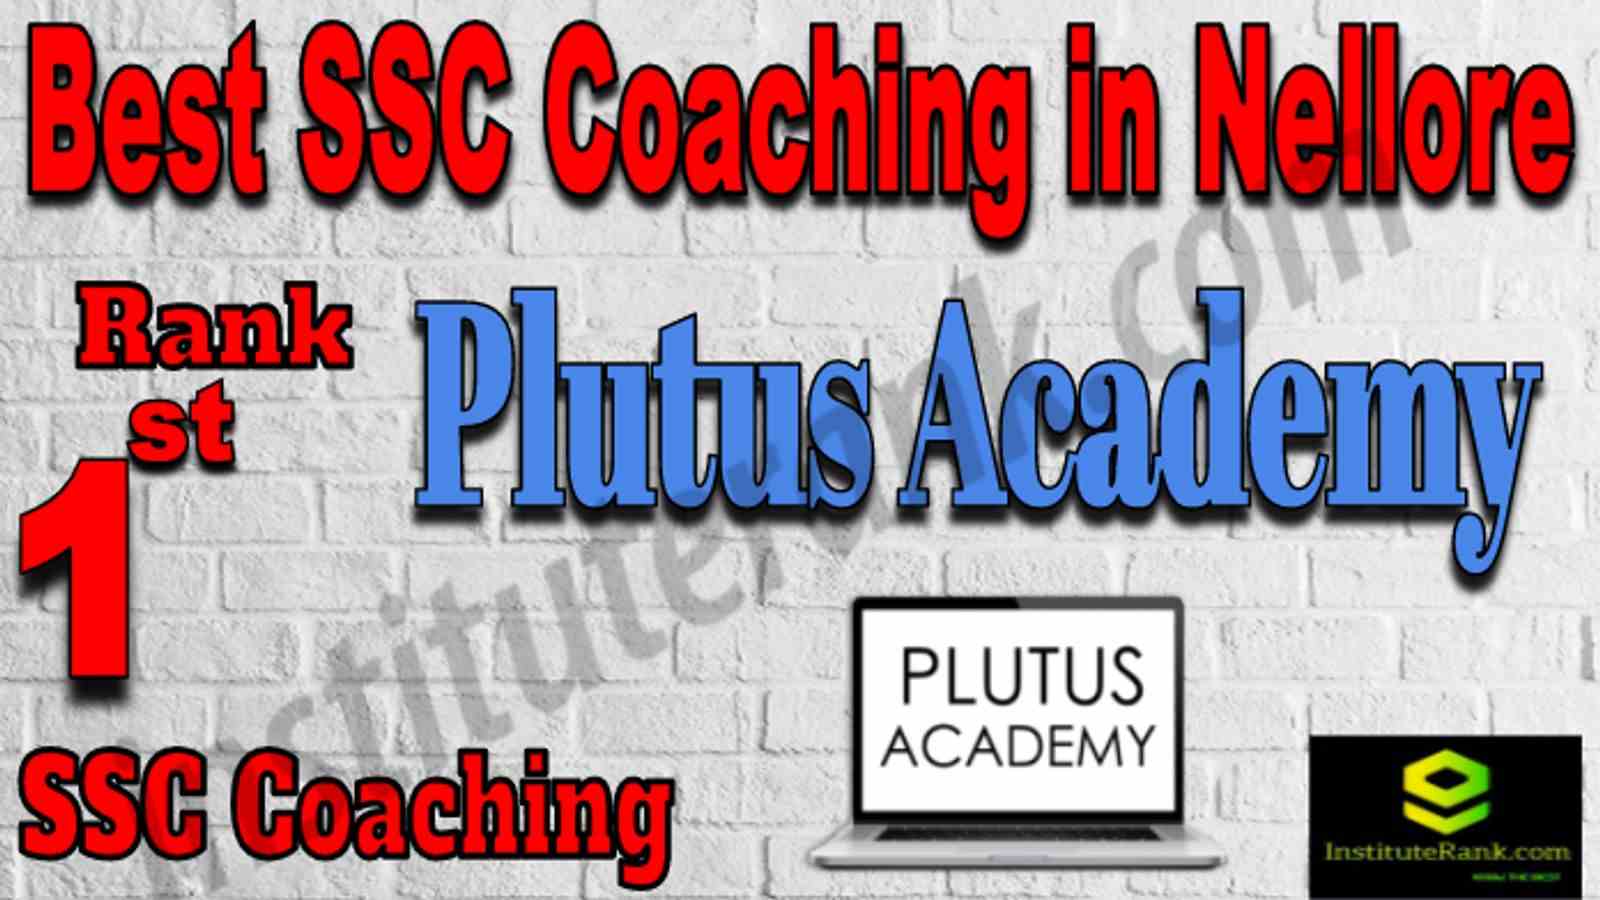 Rank 1 Best SSC Coaching in Nellore